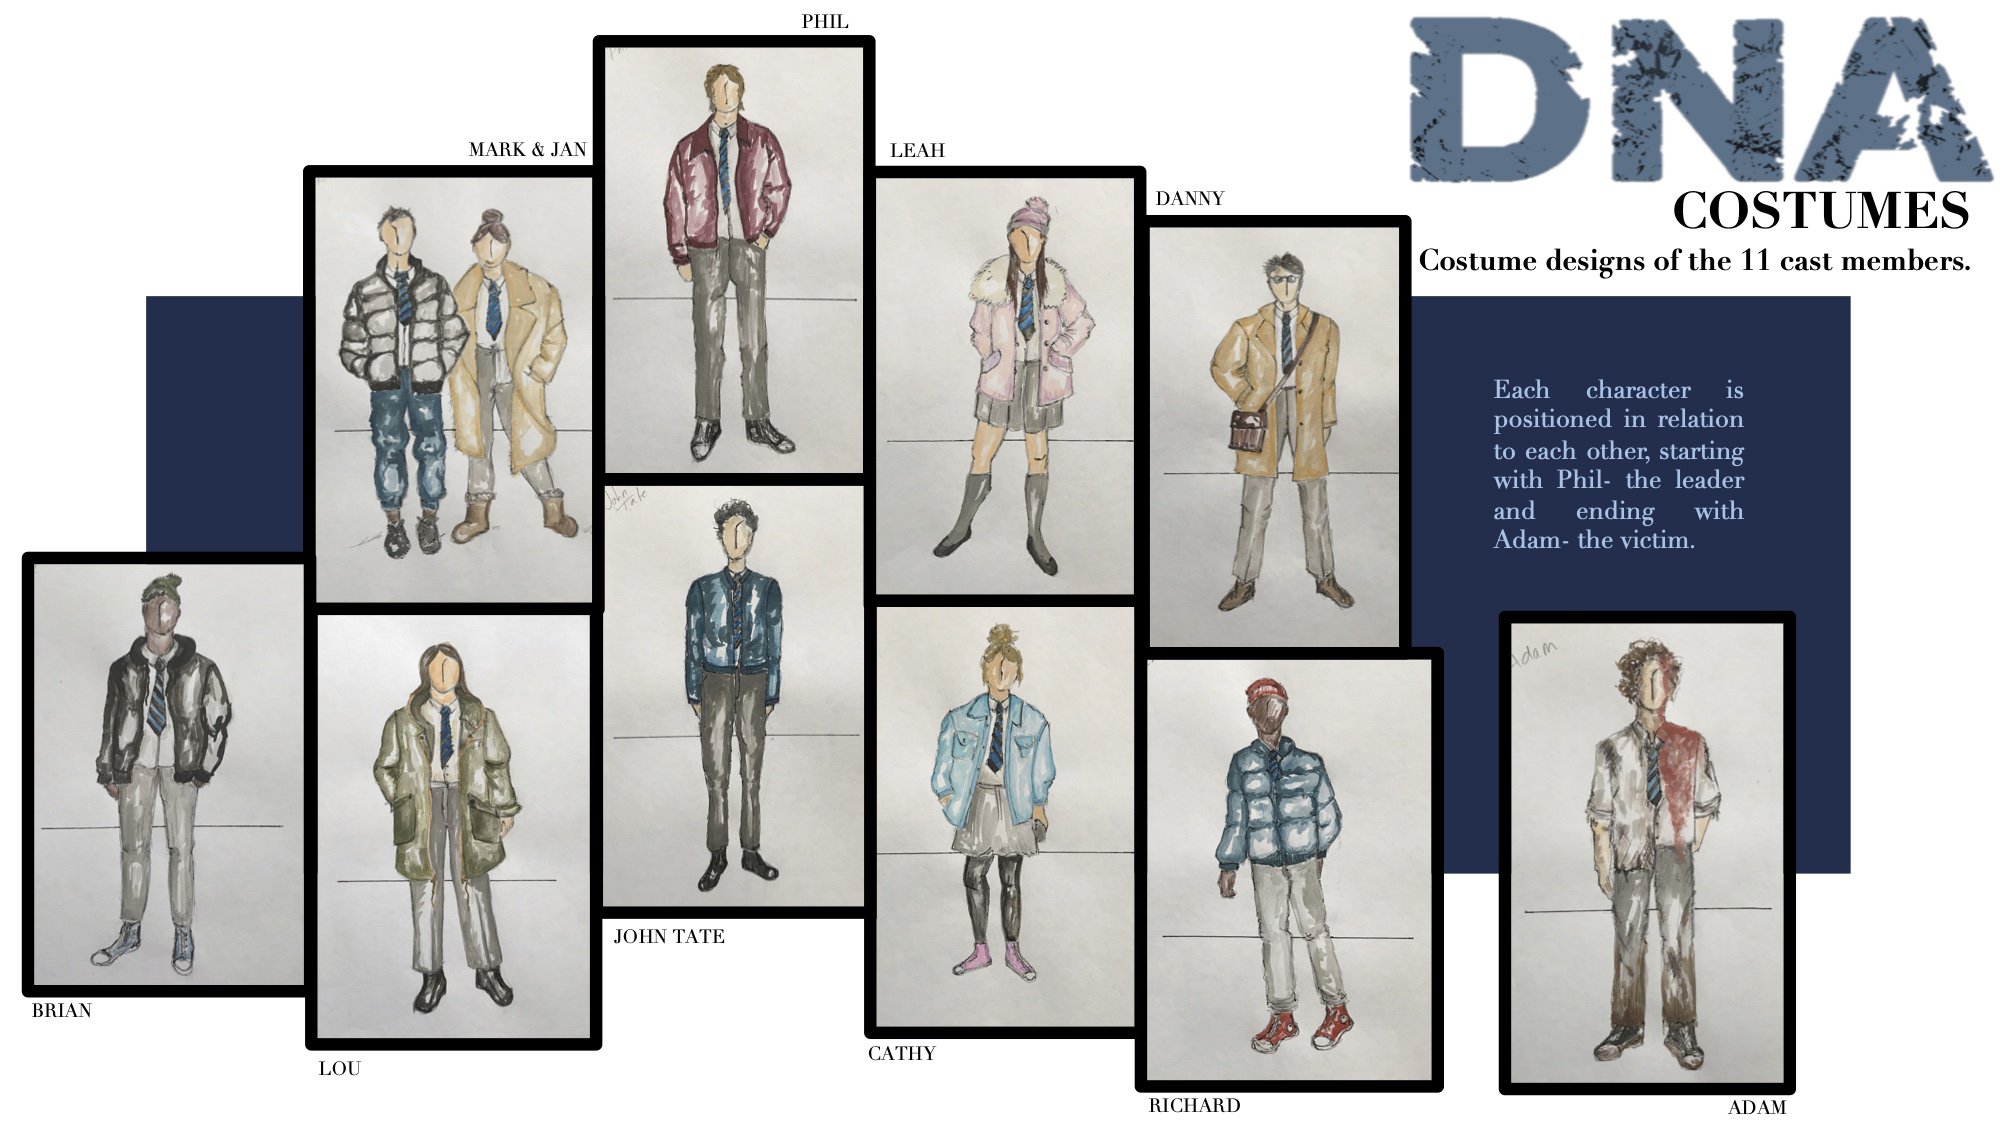 Costume designs for the 10 characters in the play- DNA